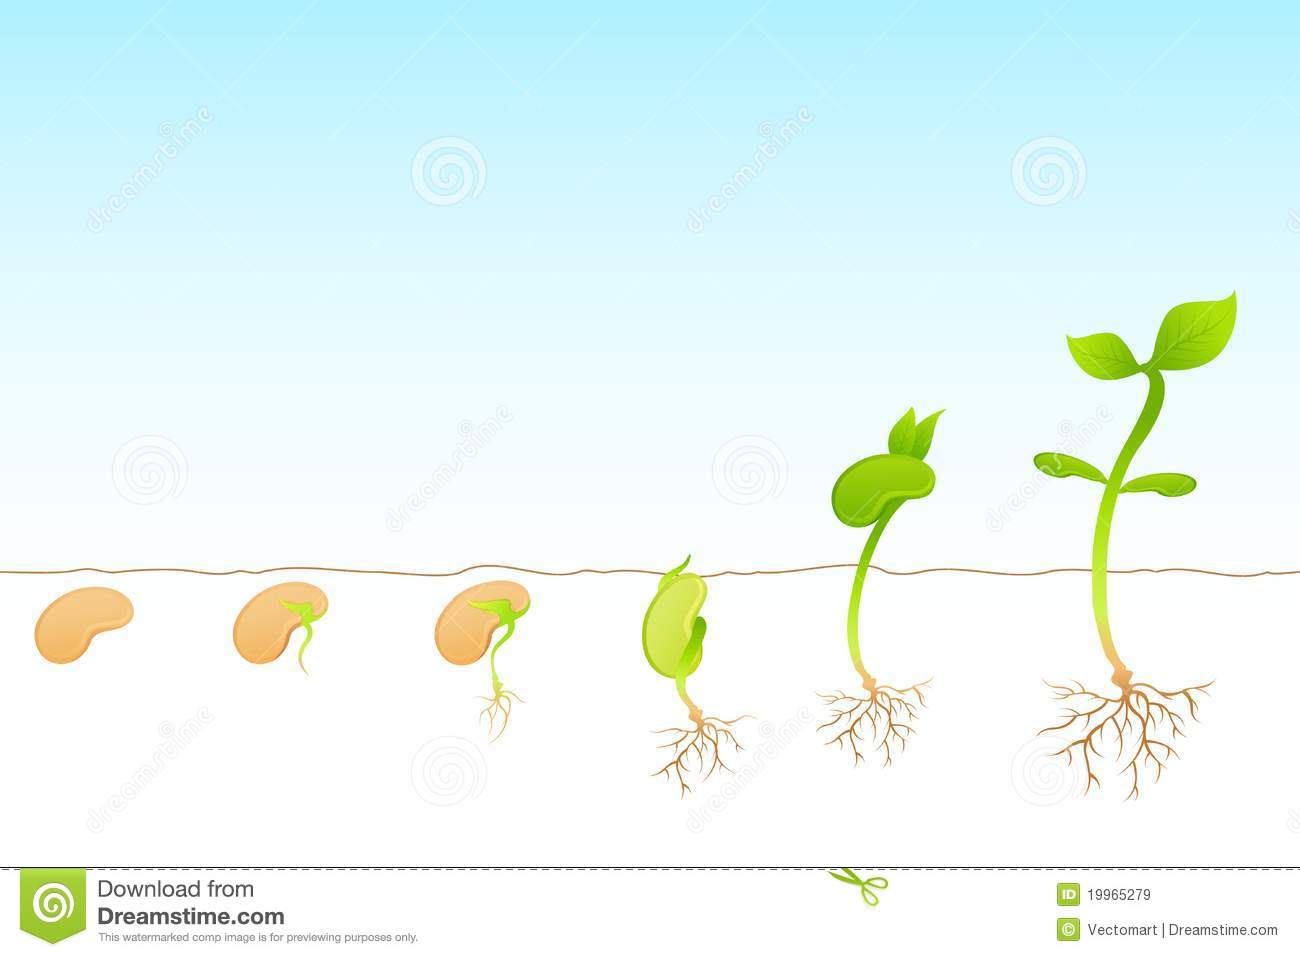 Plant Growth Royalty Free Stock Images   Image  19965279